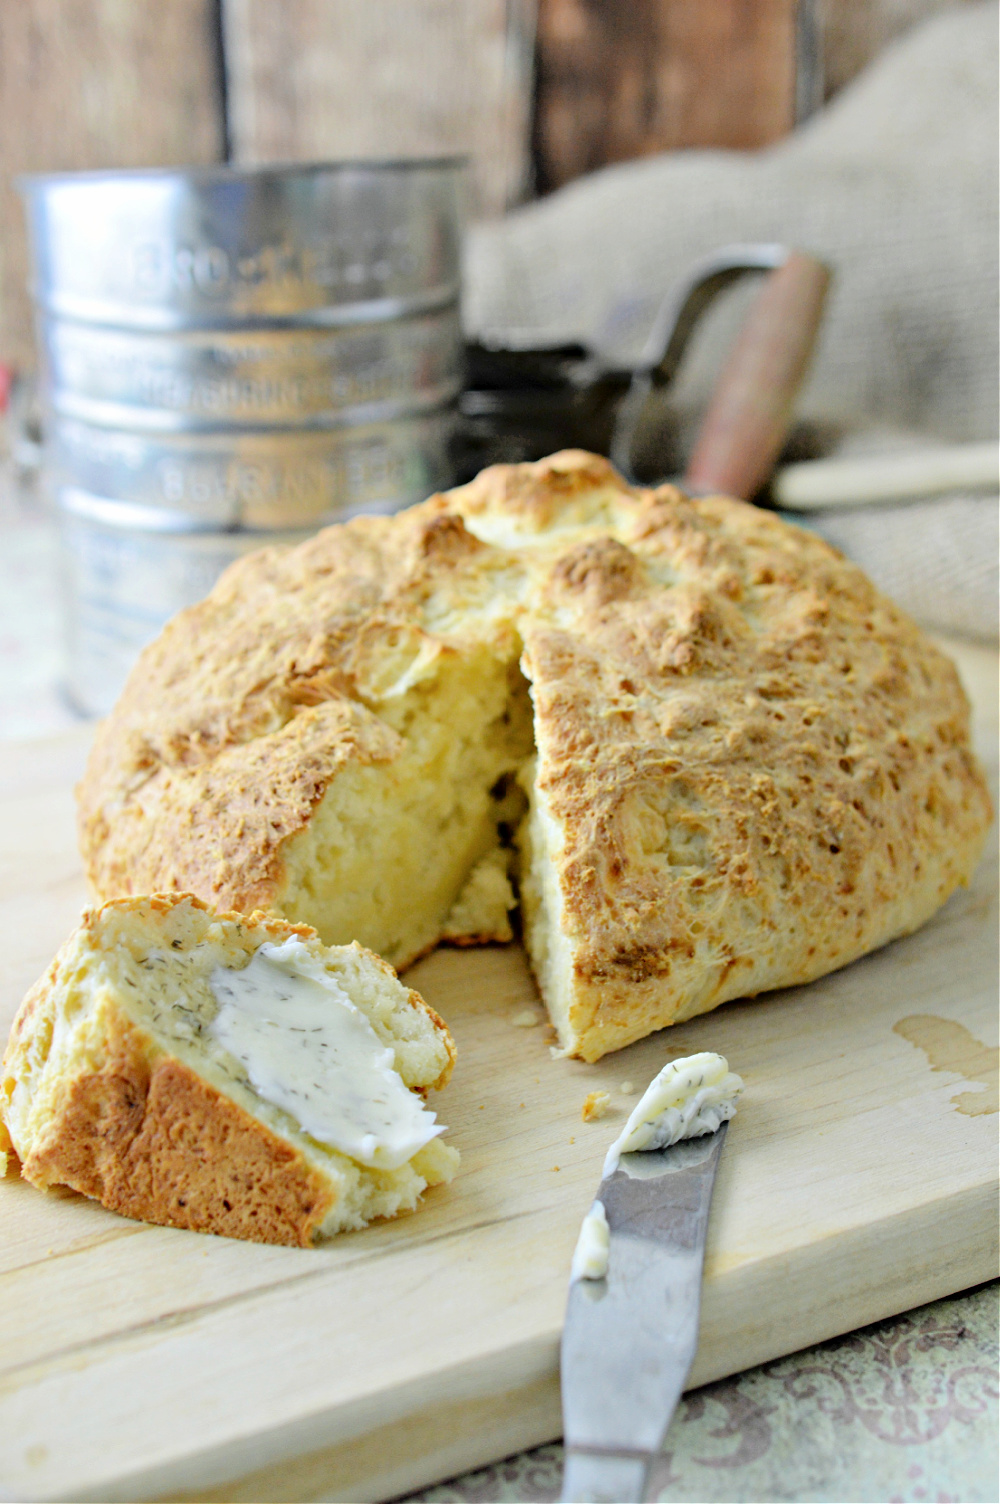 Irish Soda Bread Recipe - Great Crusty Loaf Made Quick and Easy